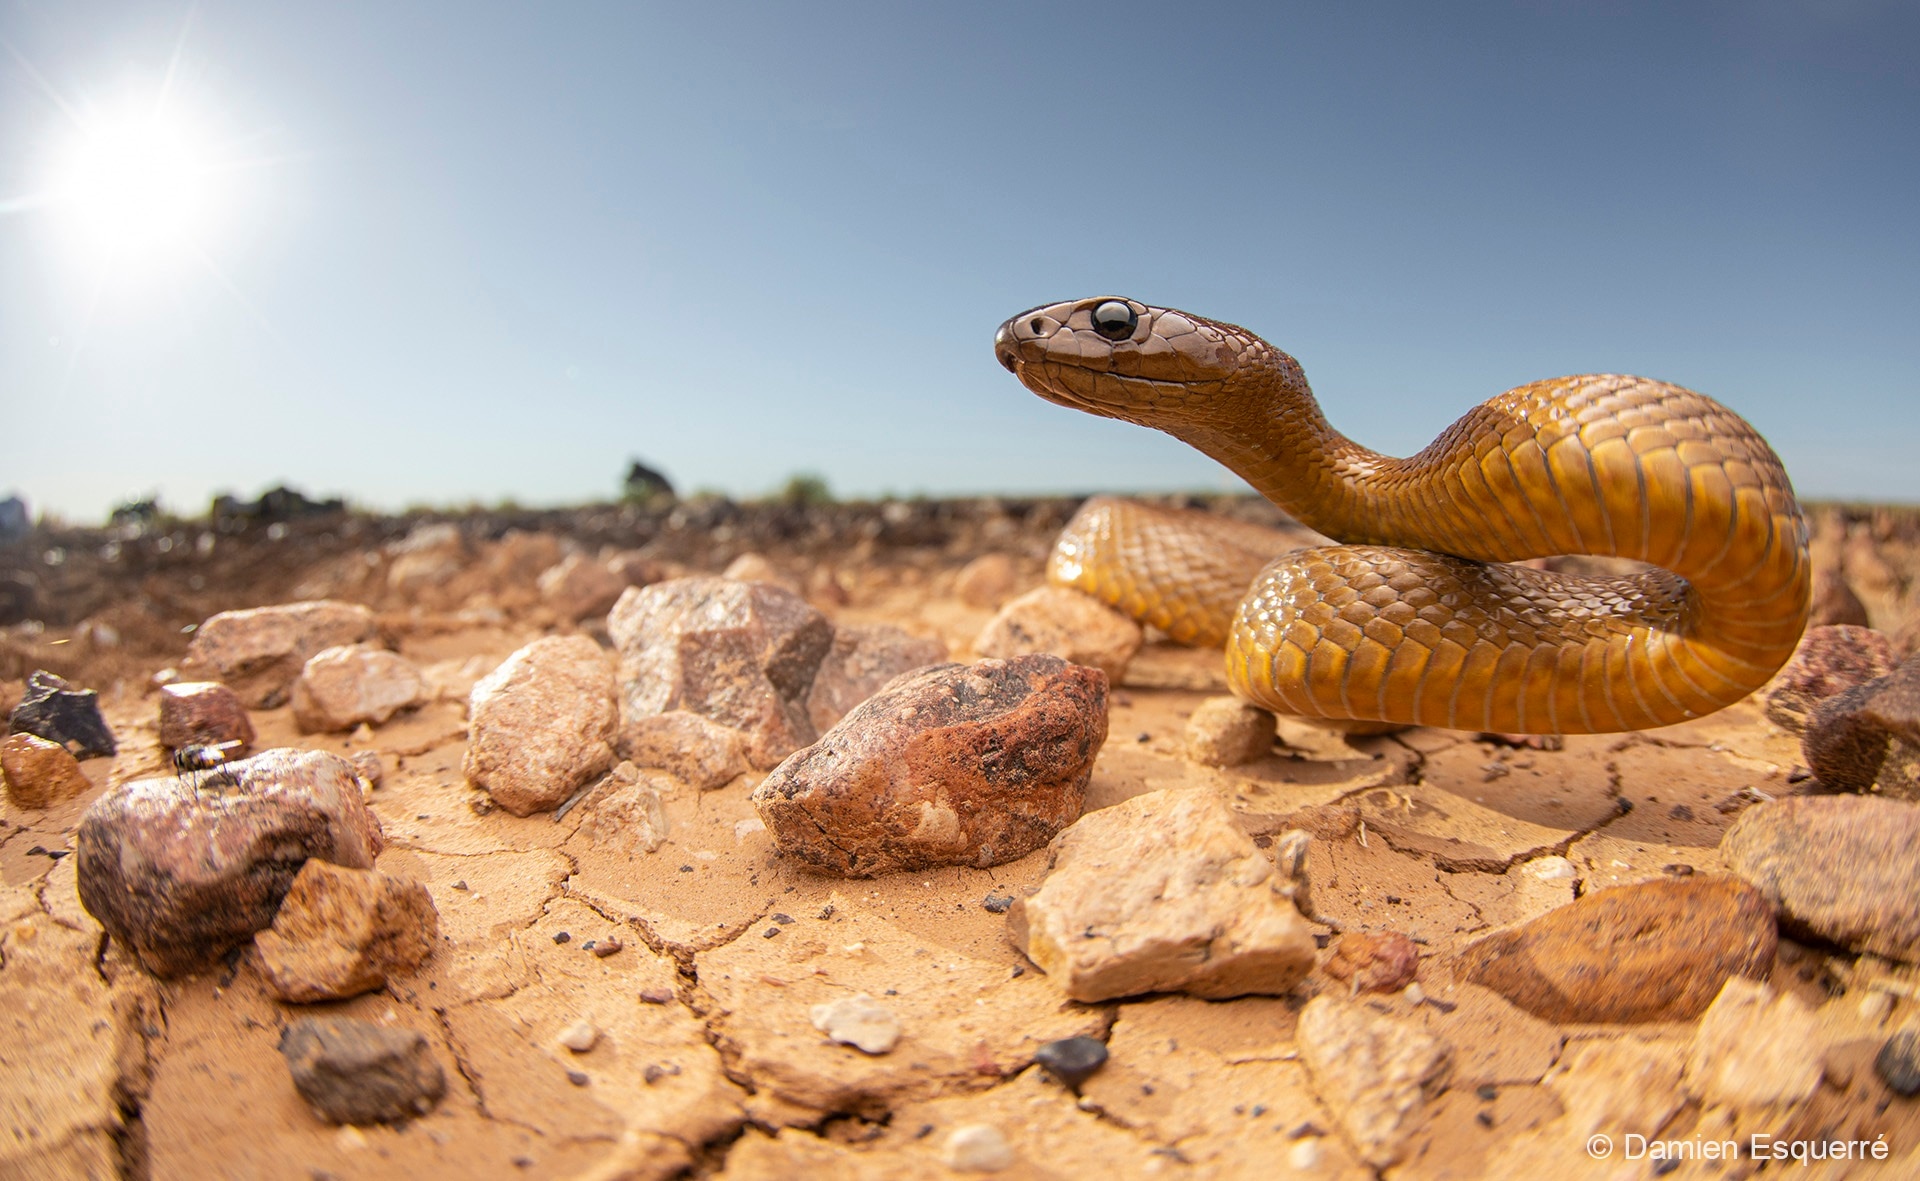 A close up of a taipan snake in the desert. 